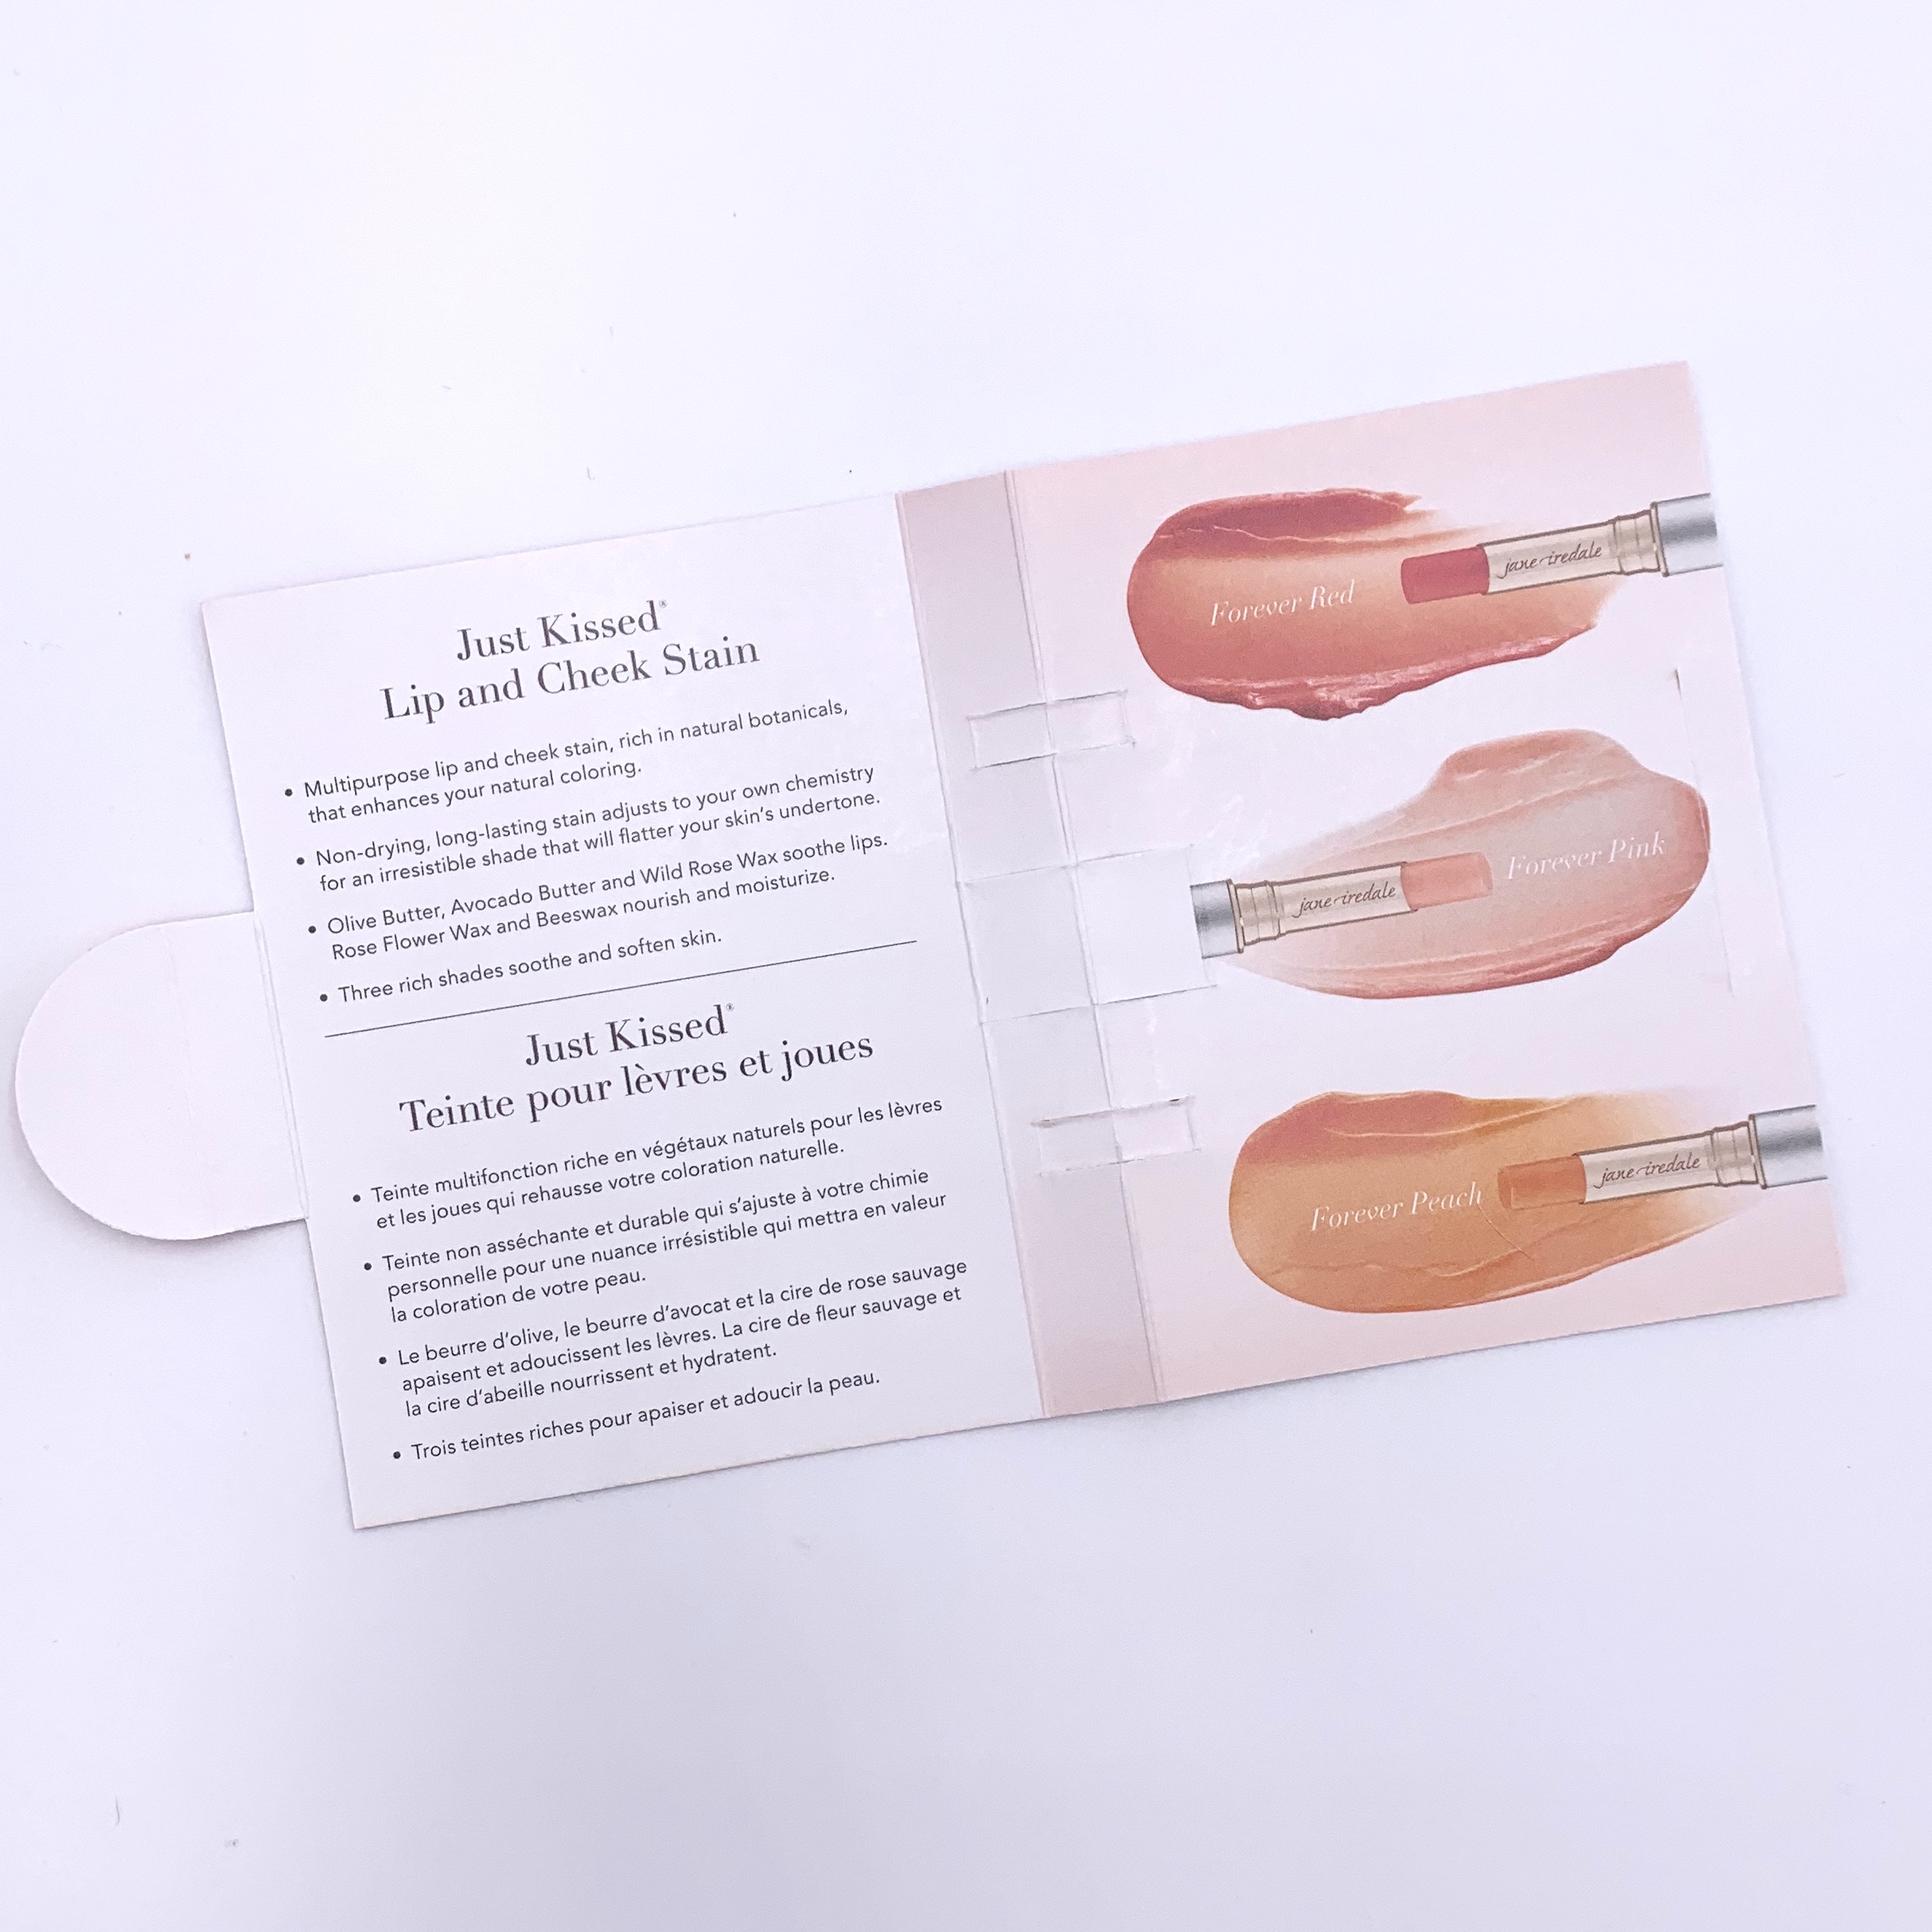 Jane Iredale Just Kissed Lip & Cheek Stain - Forever Pink Card Inside for Birchbox August 2020